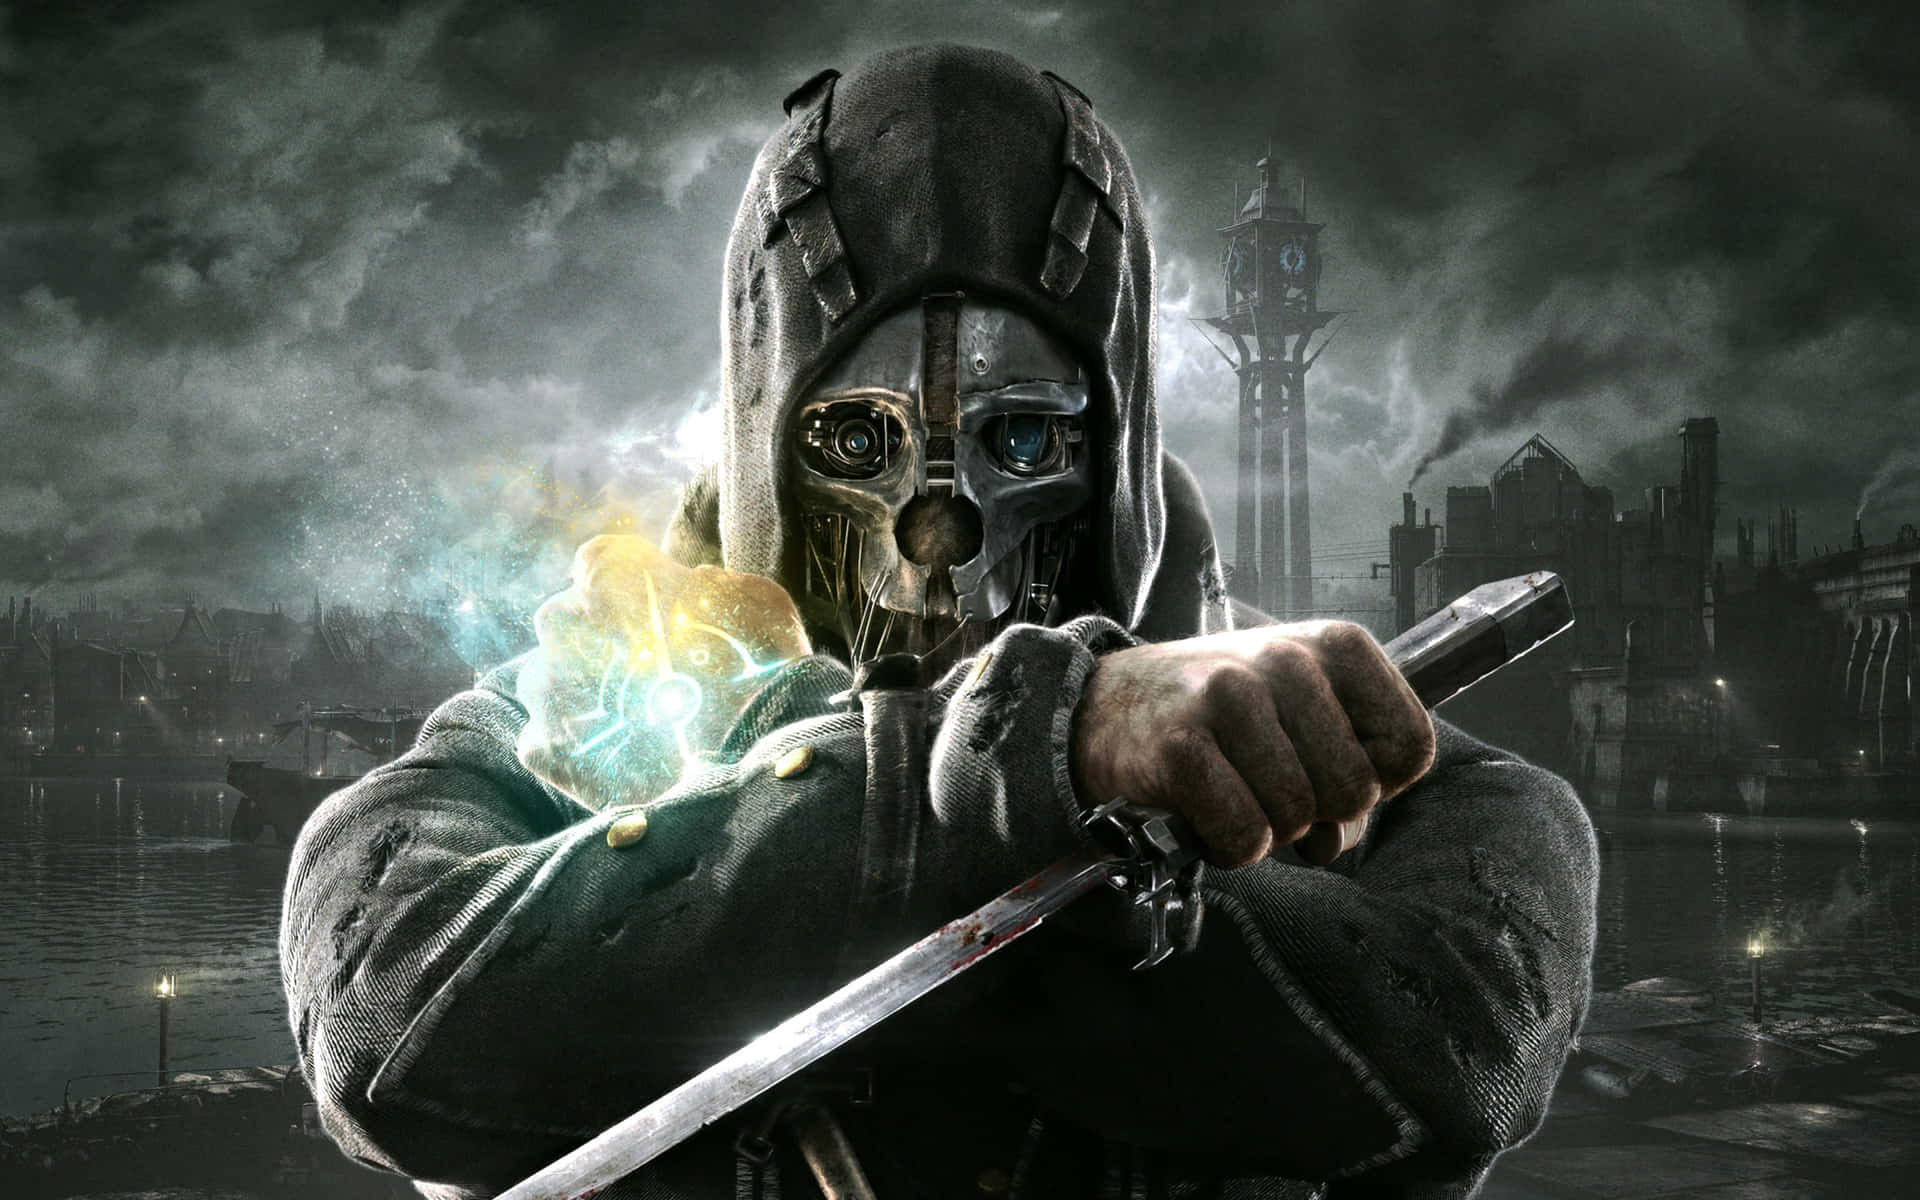 Black Scary 4k Dishonored Wallpaper